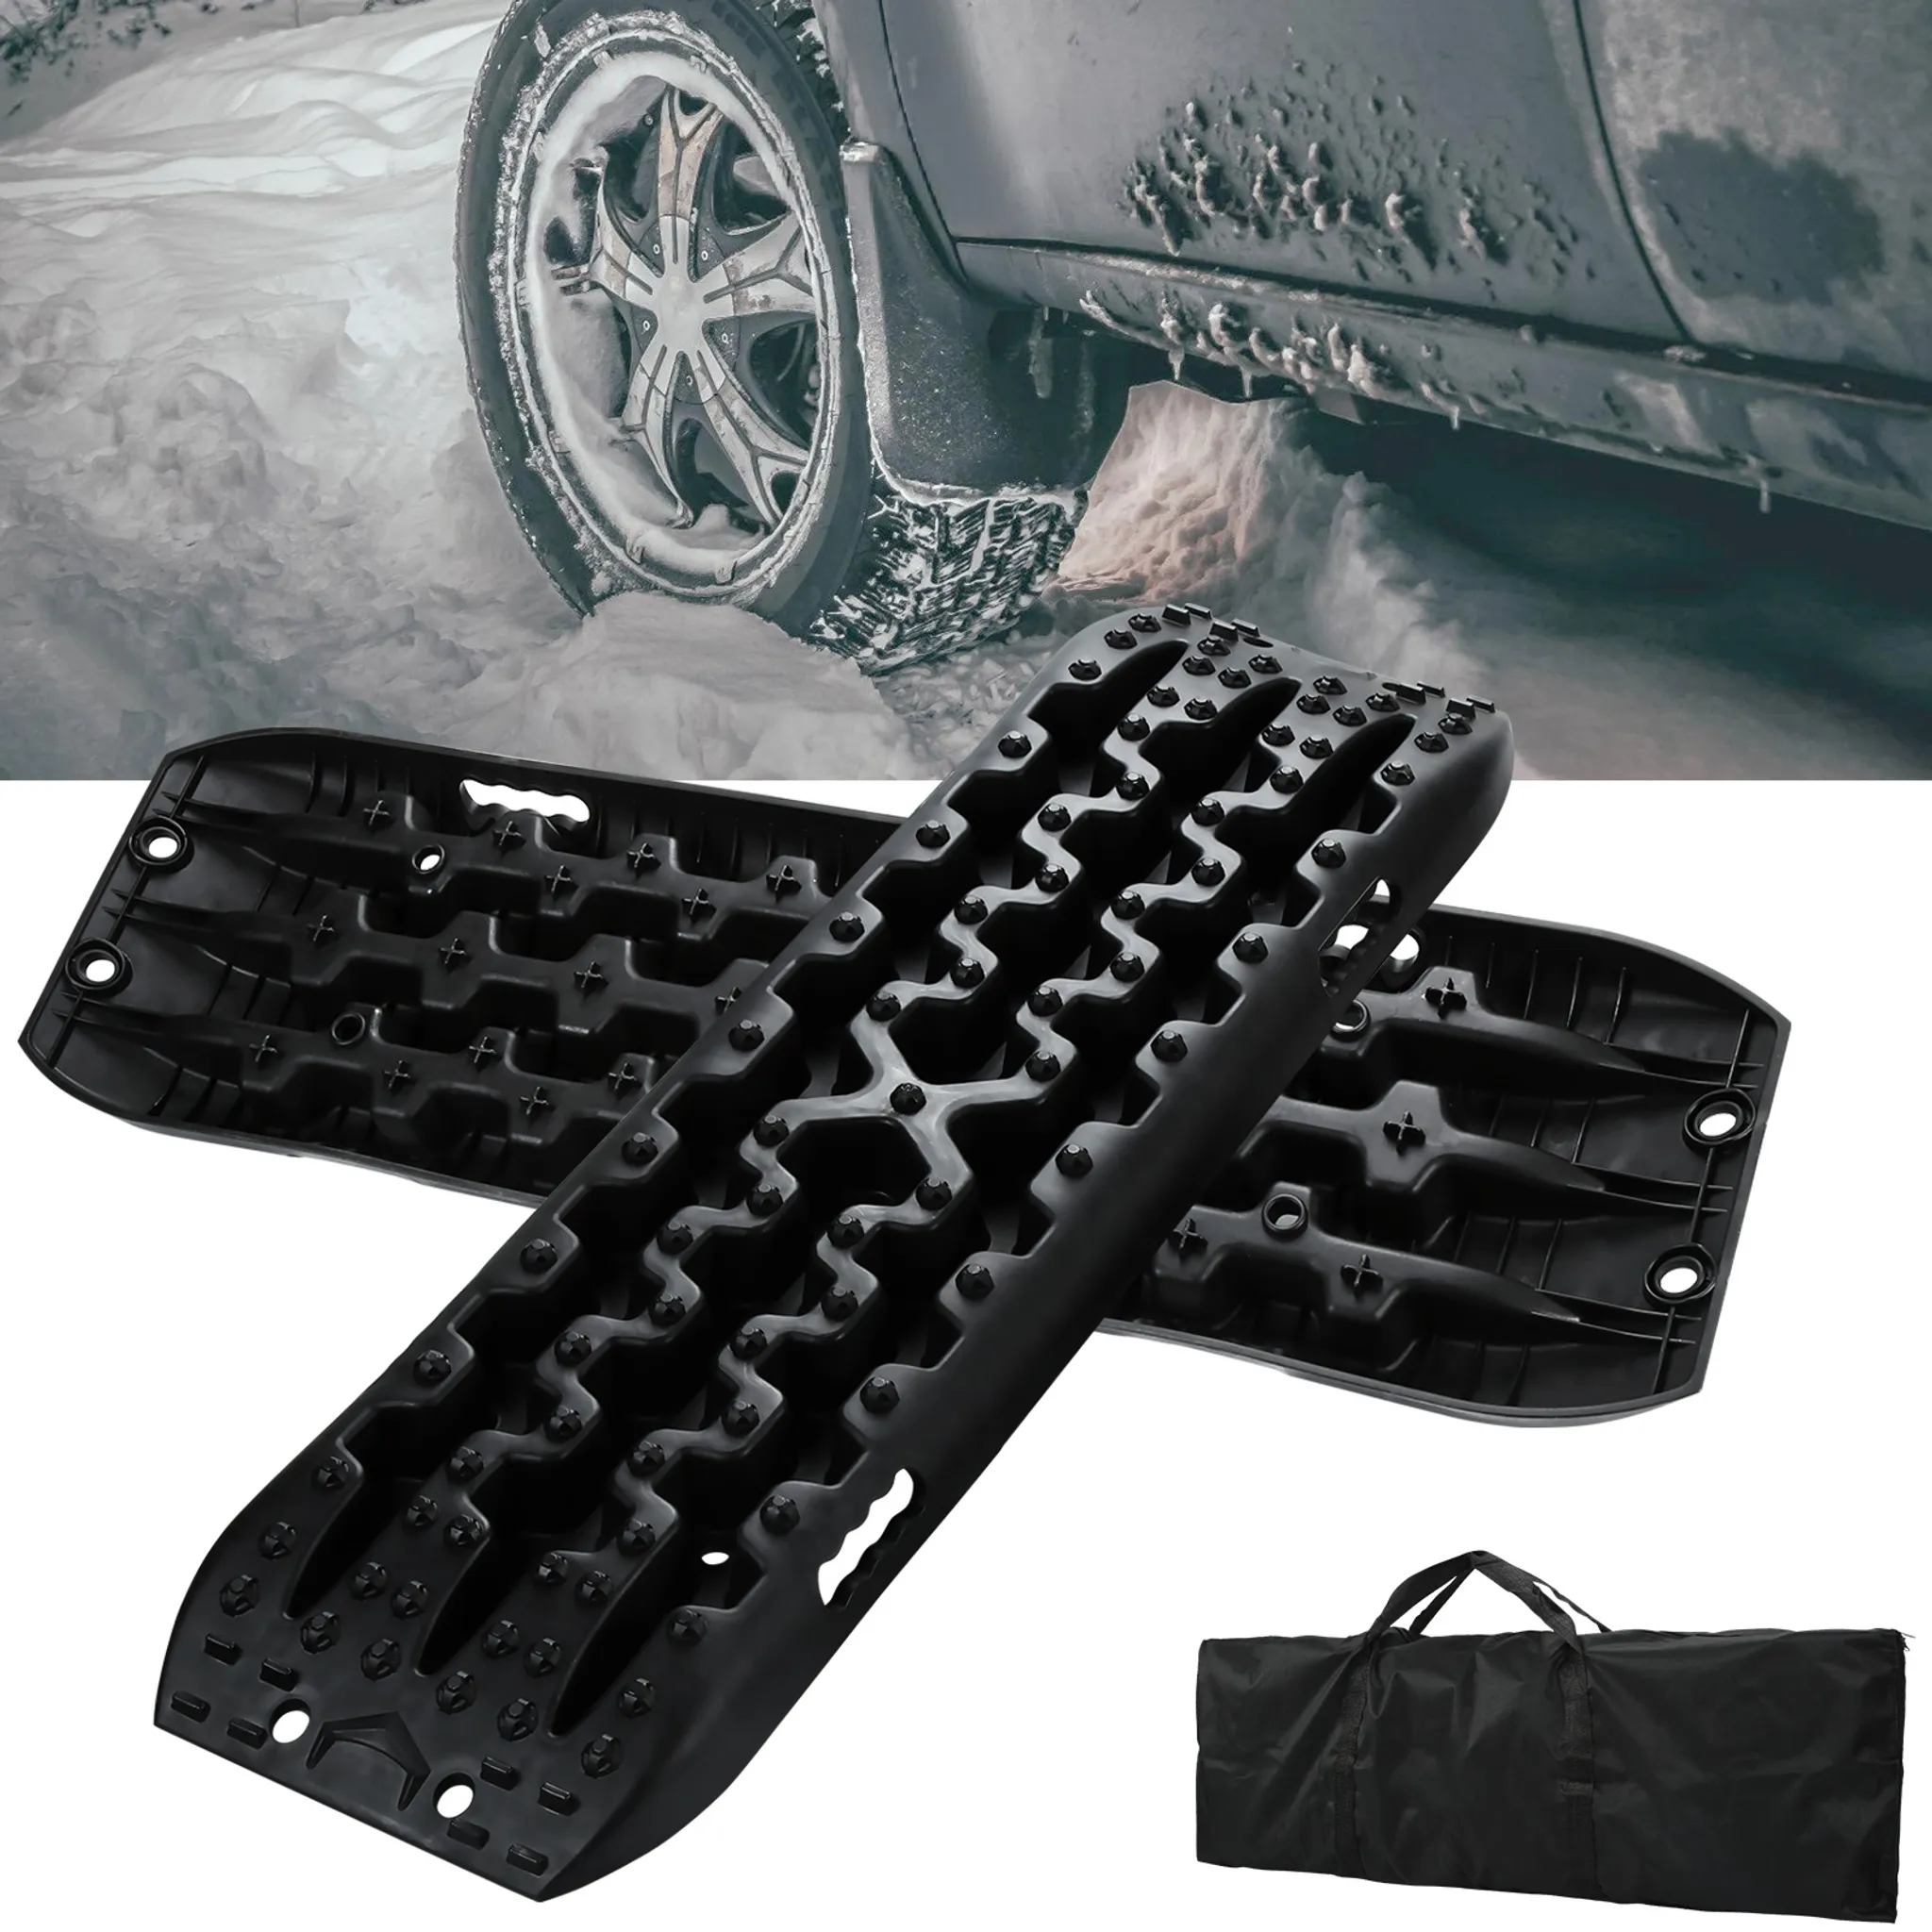 Sandboards - Sandbleche - Recovery Boards - Traction Boards